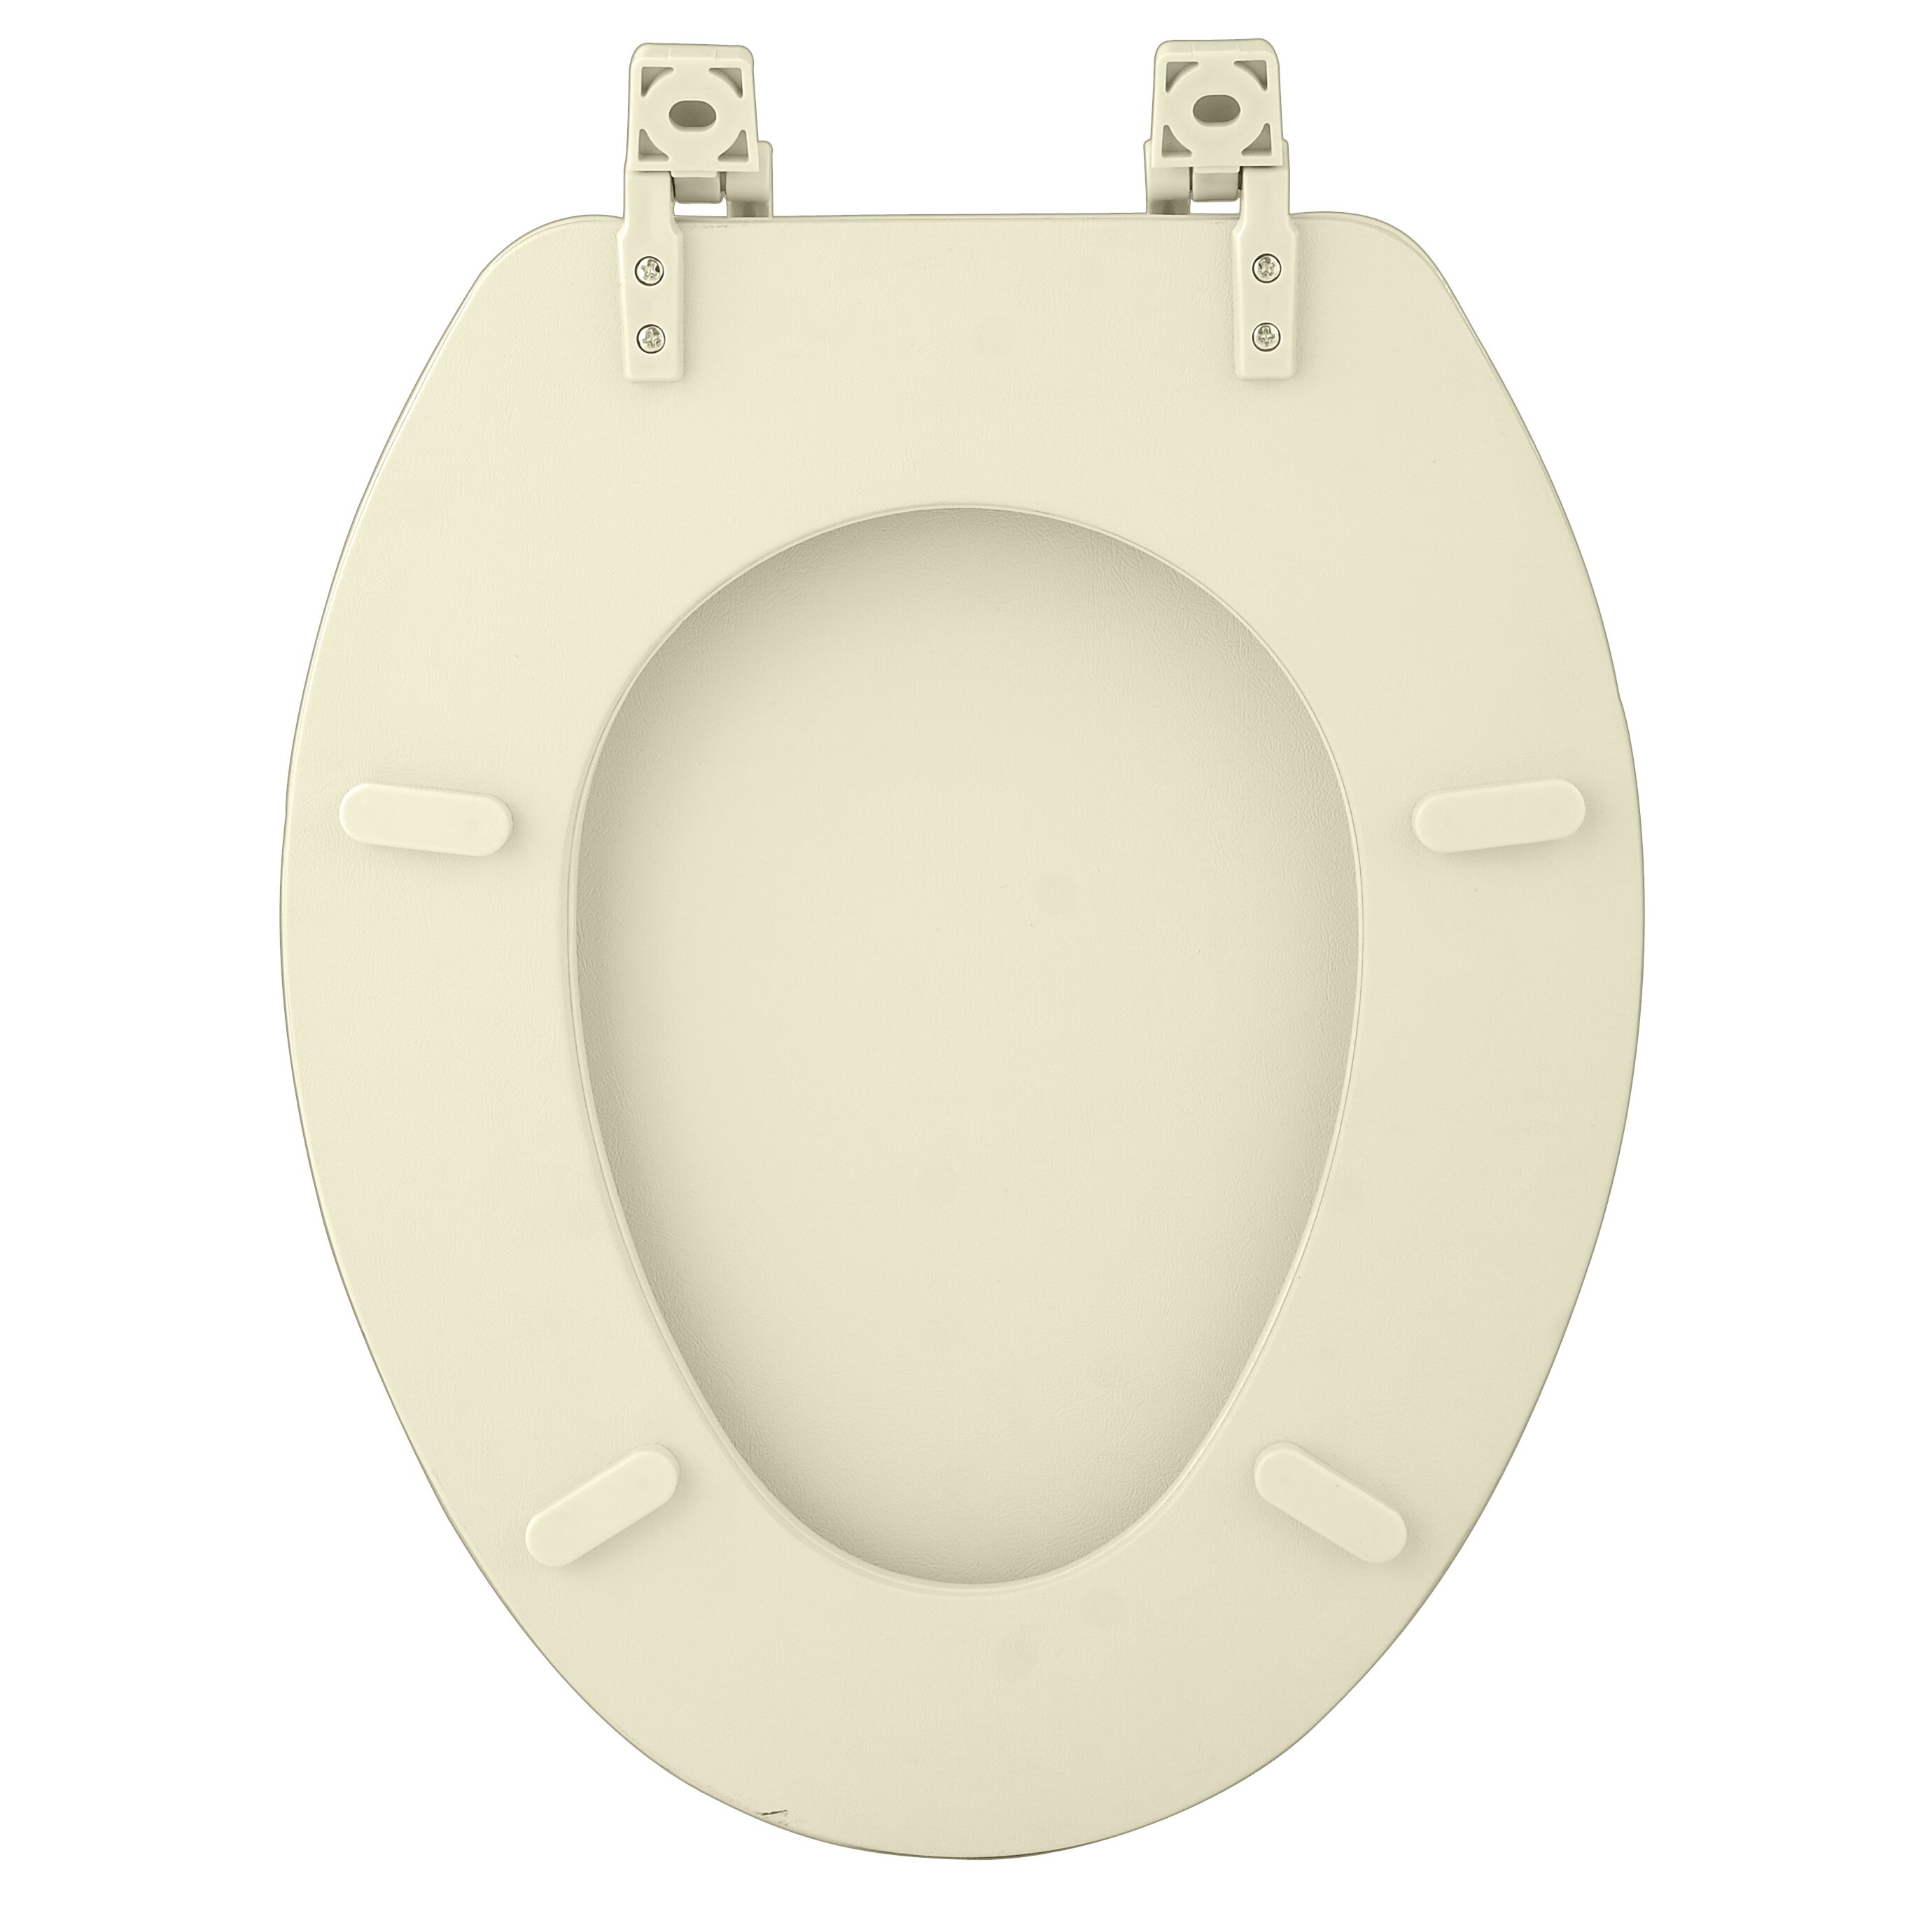 Achim Importing Co Fantasia Soft Elongated Toilet Seat And Reviews Wayfair